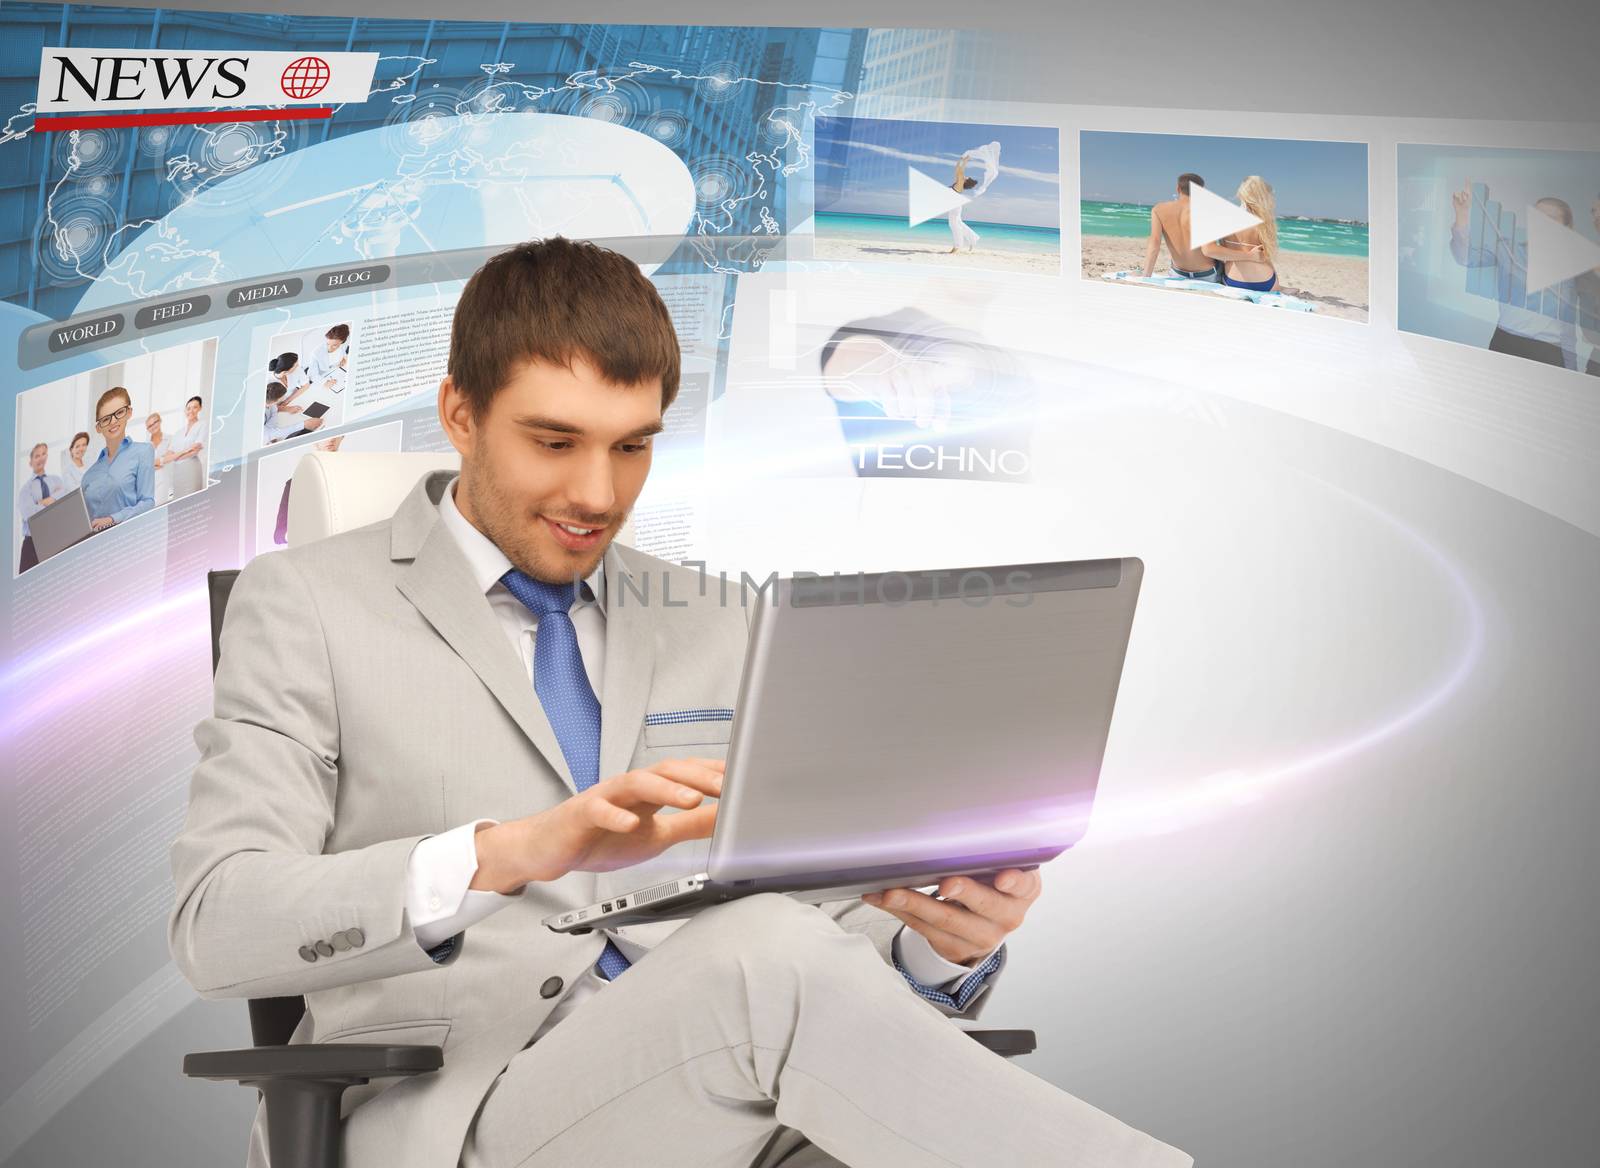 business, technology, internet and news concept - businessman with laptop pc and virtual screens reading news